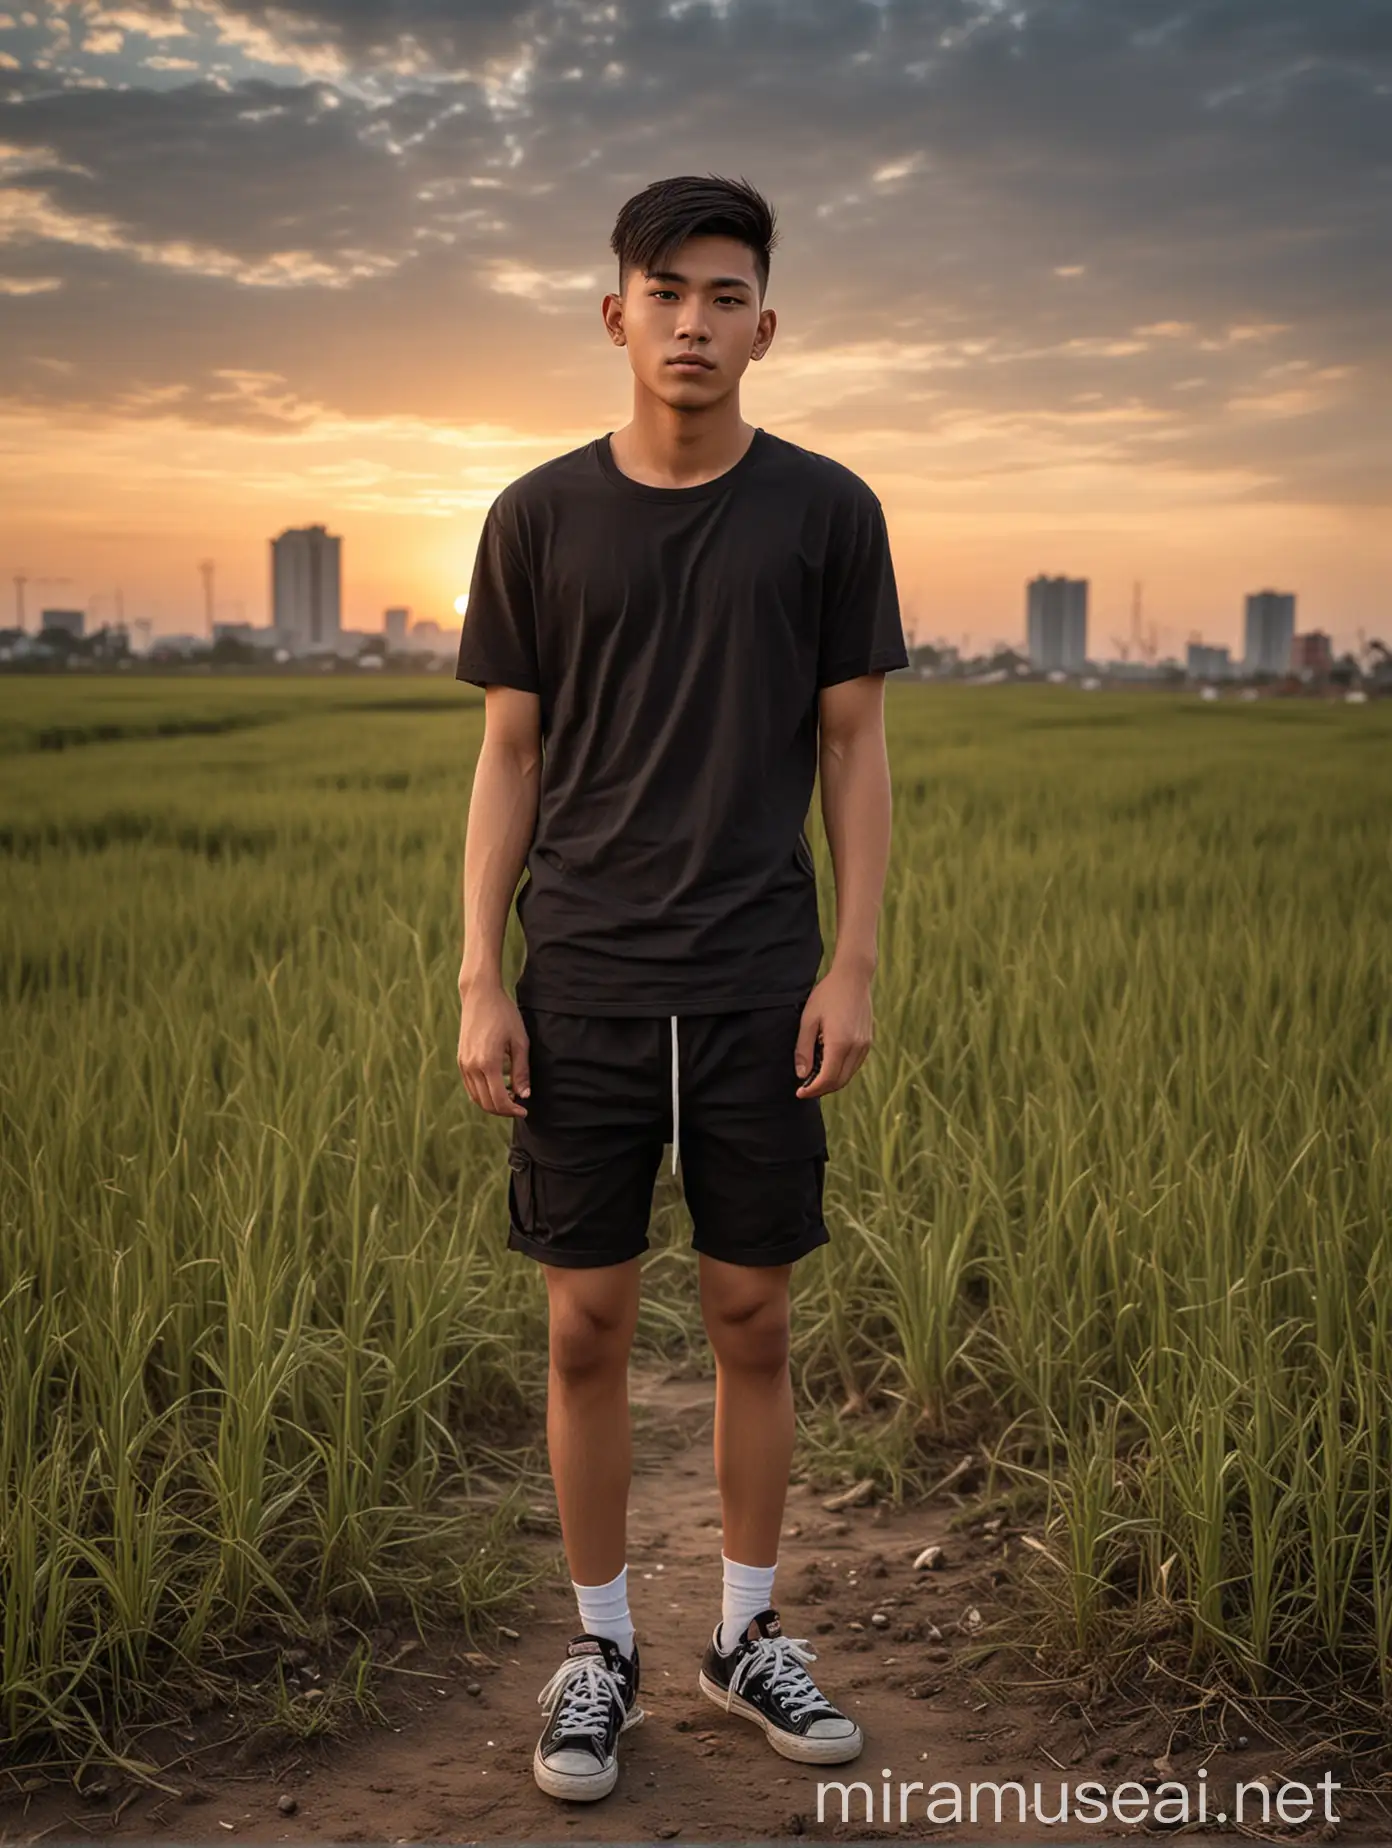 Indonesian Man in Black TShirt and Shorts at Sunrise Field